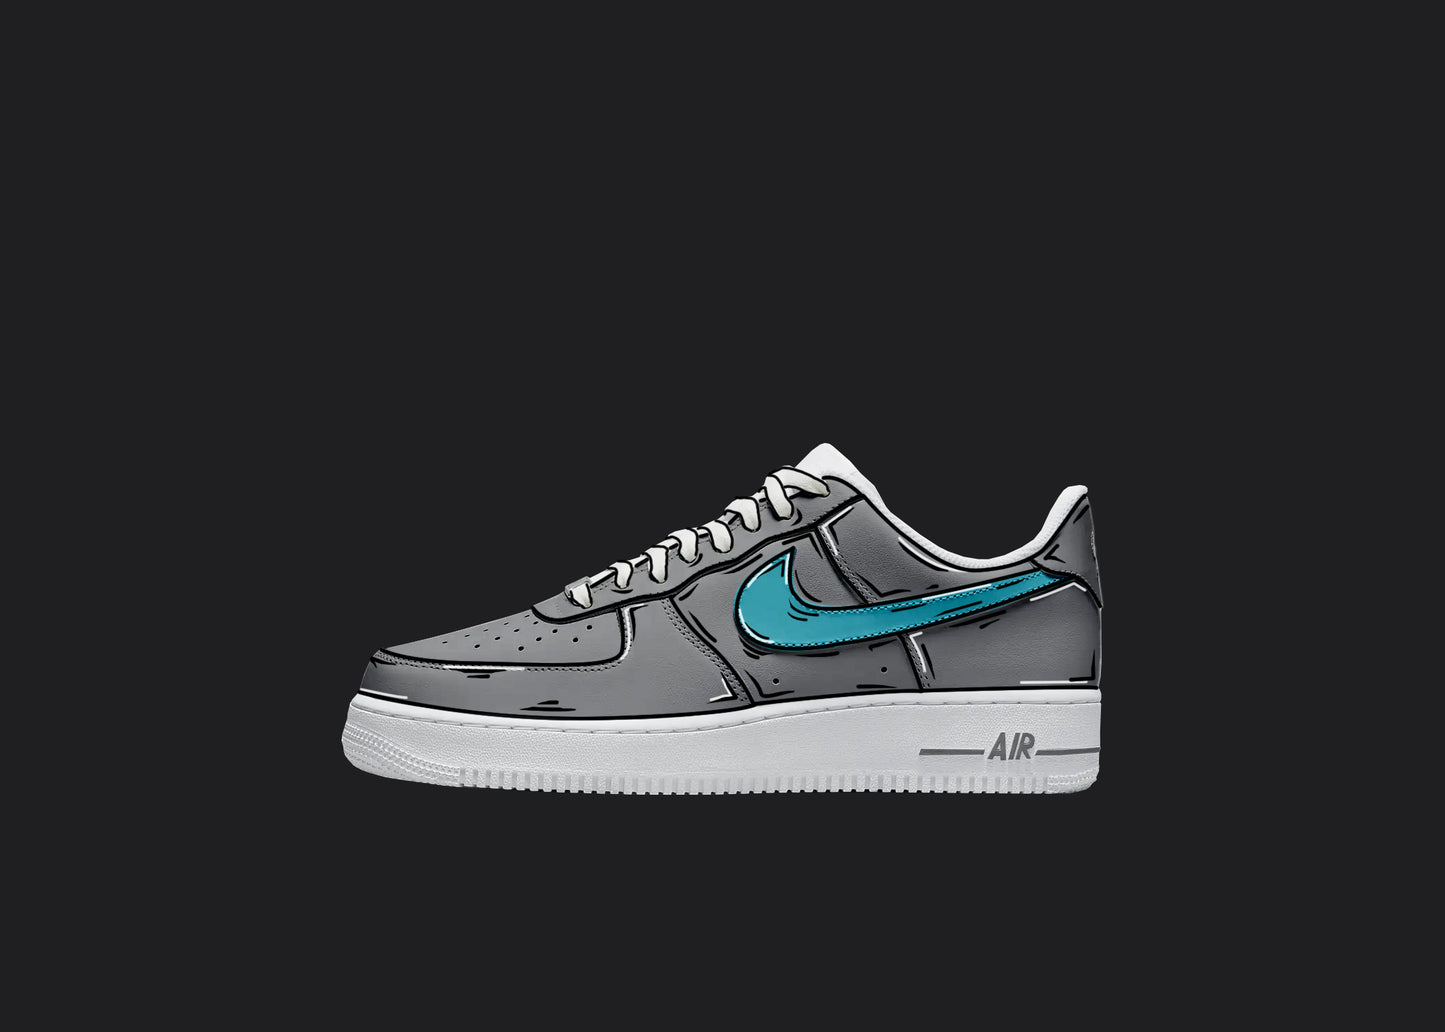 gray and blue csutom hand painted white nike air force 1 sneakers. the gray and blue colorway is covered with cartoon outline styled details all over the sneaker in white and black. the sneaker is on a black plain background from a side view